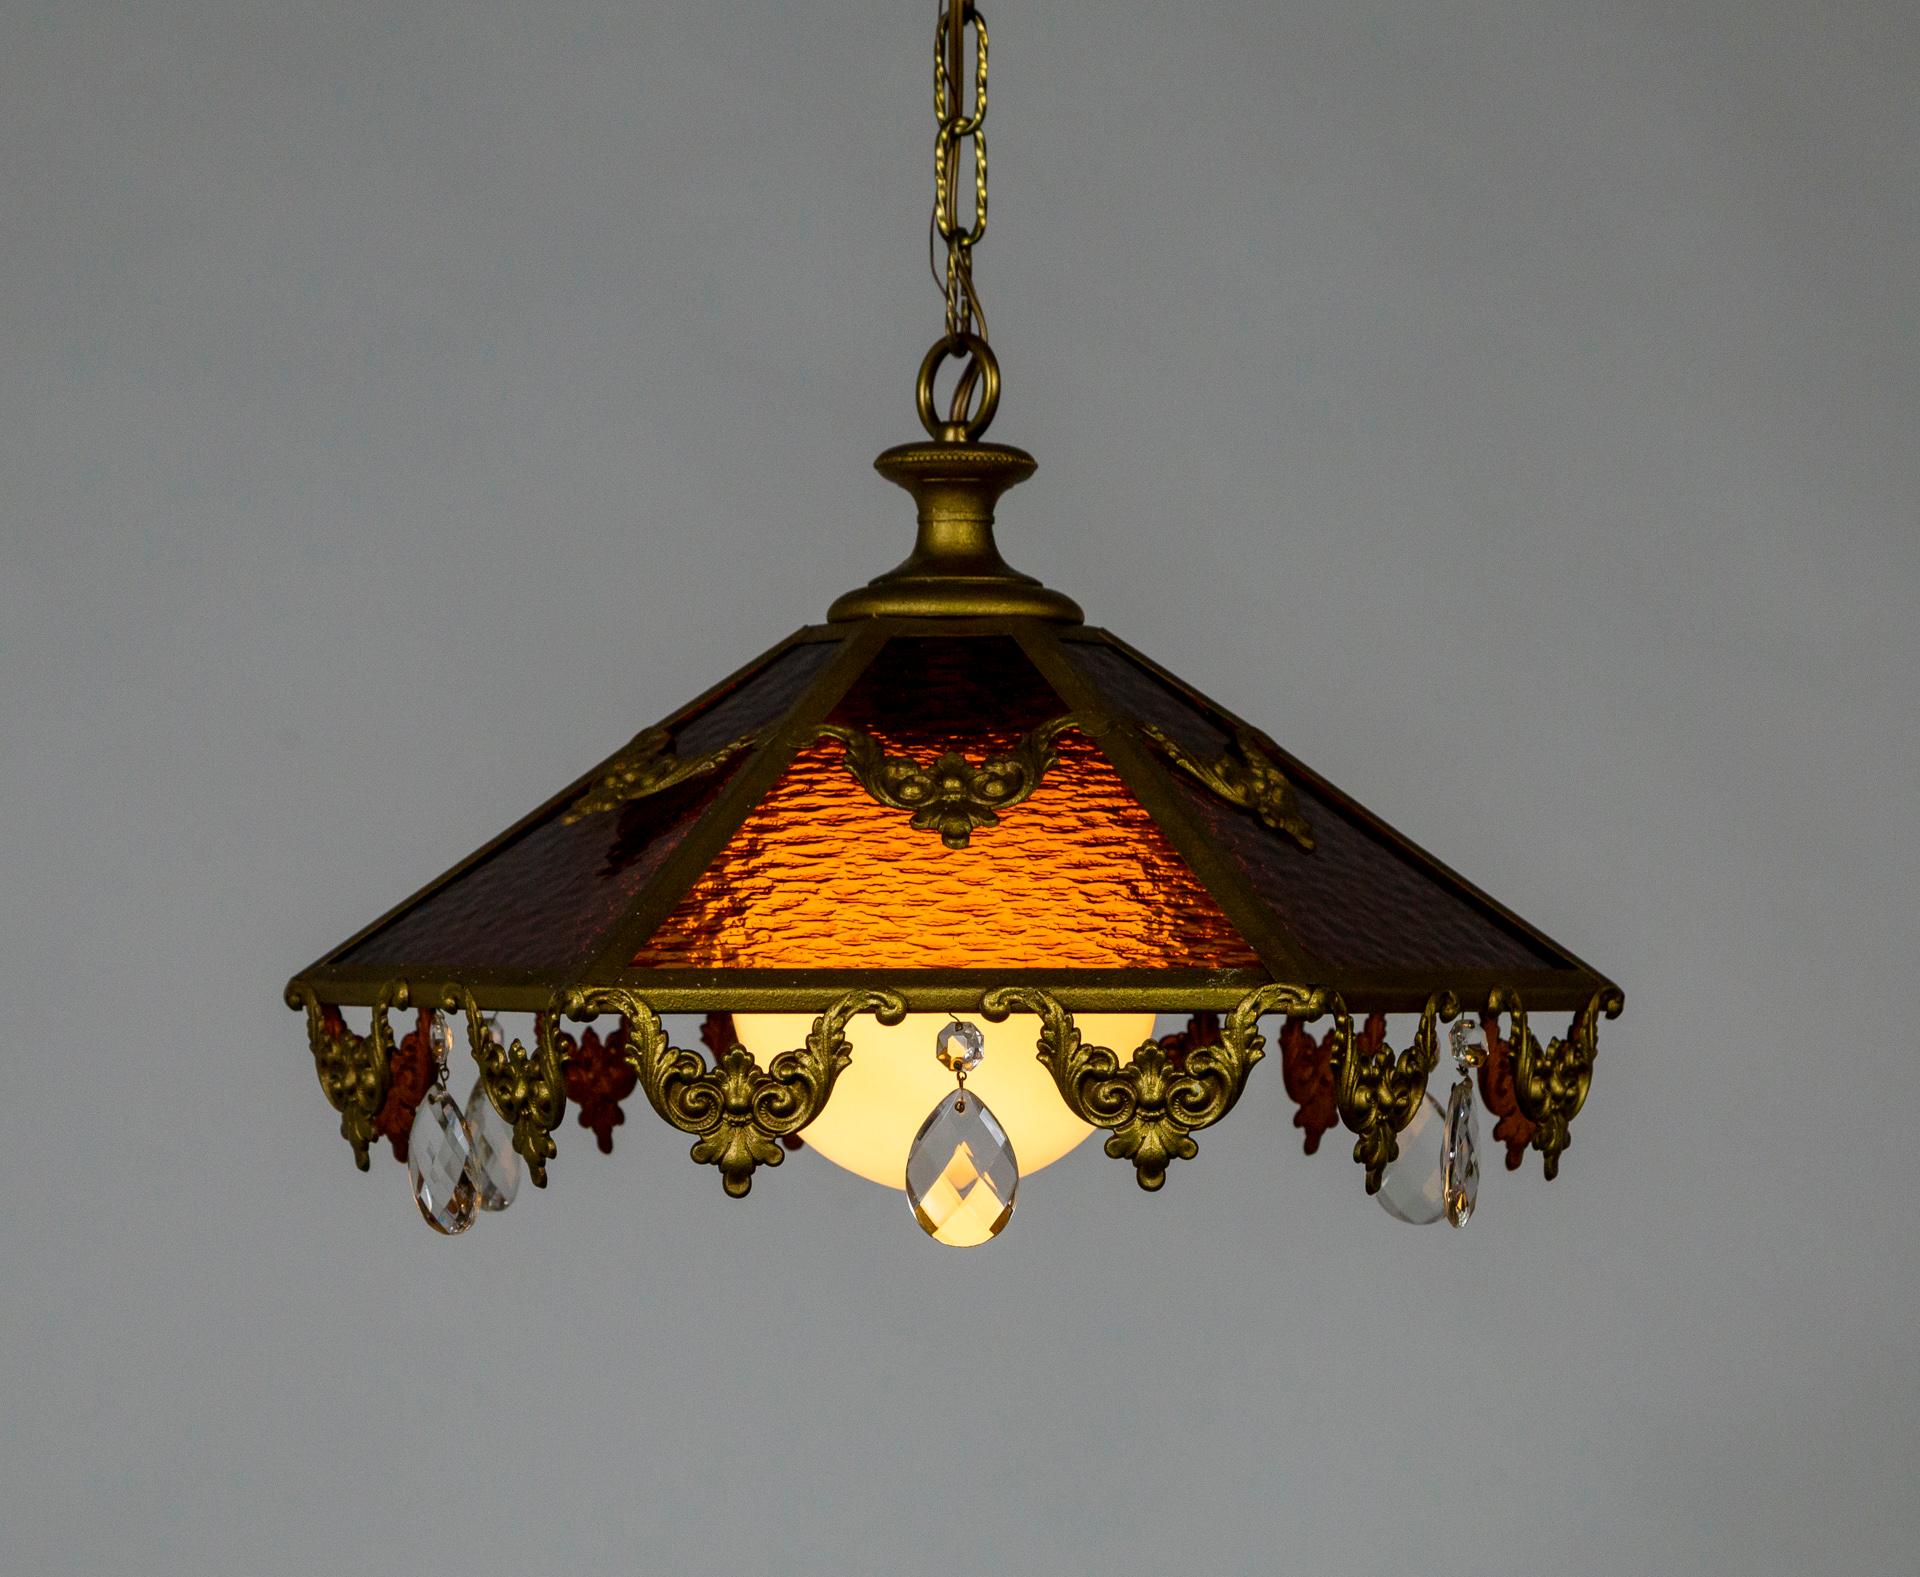 An antique pendant light with 6 rippled, stained glass panes forming a coolie shape; alternating between amber and red-brown. With a large, white, globe shade and gold painted trim and garland details with large, cut crystal drops hanging from each